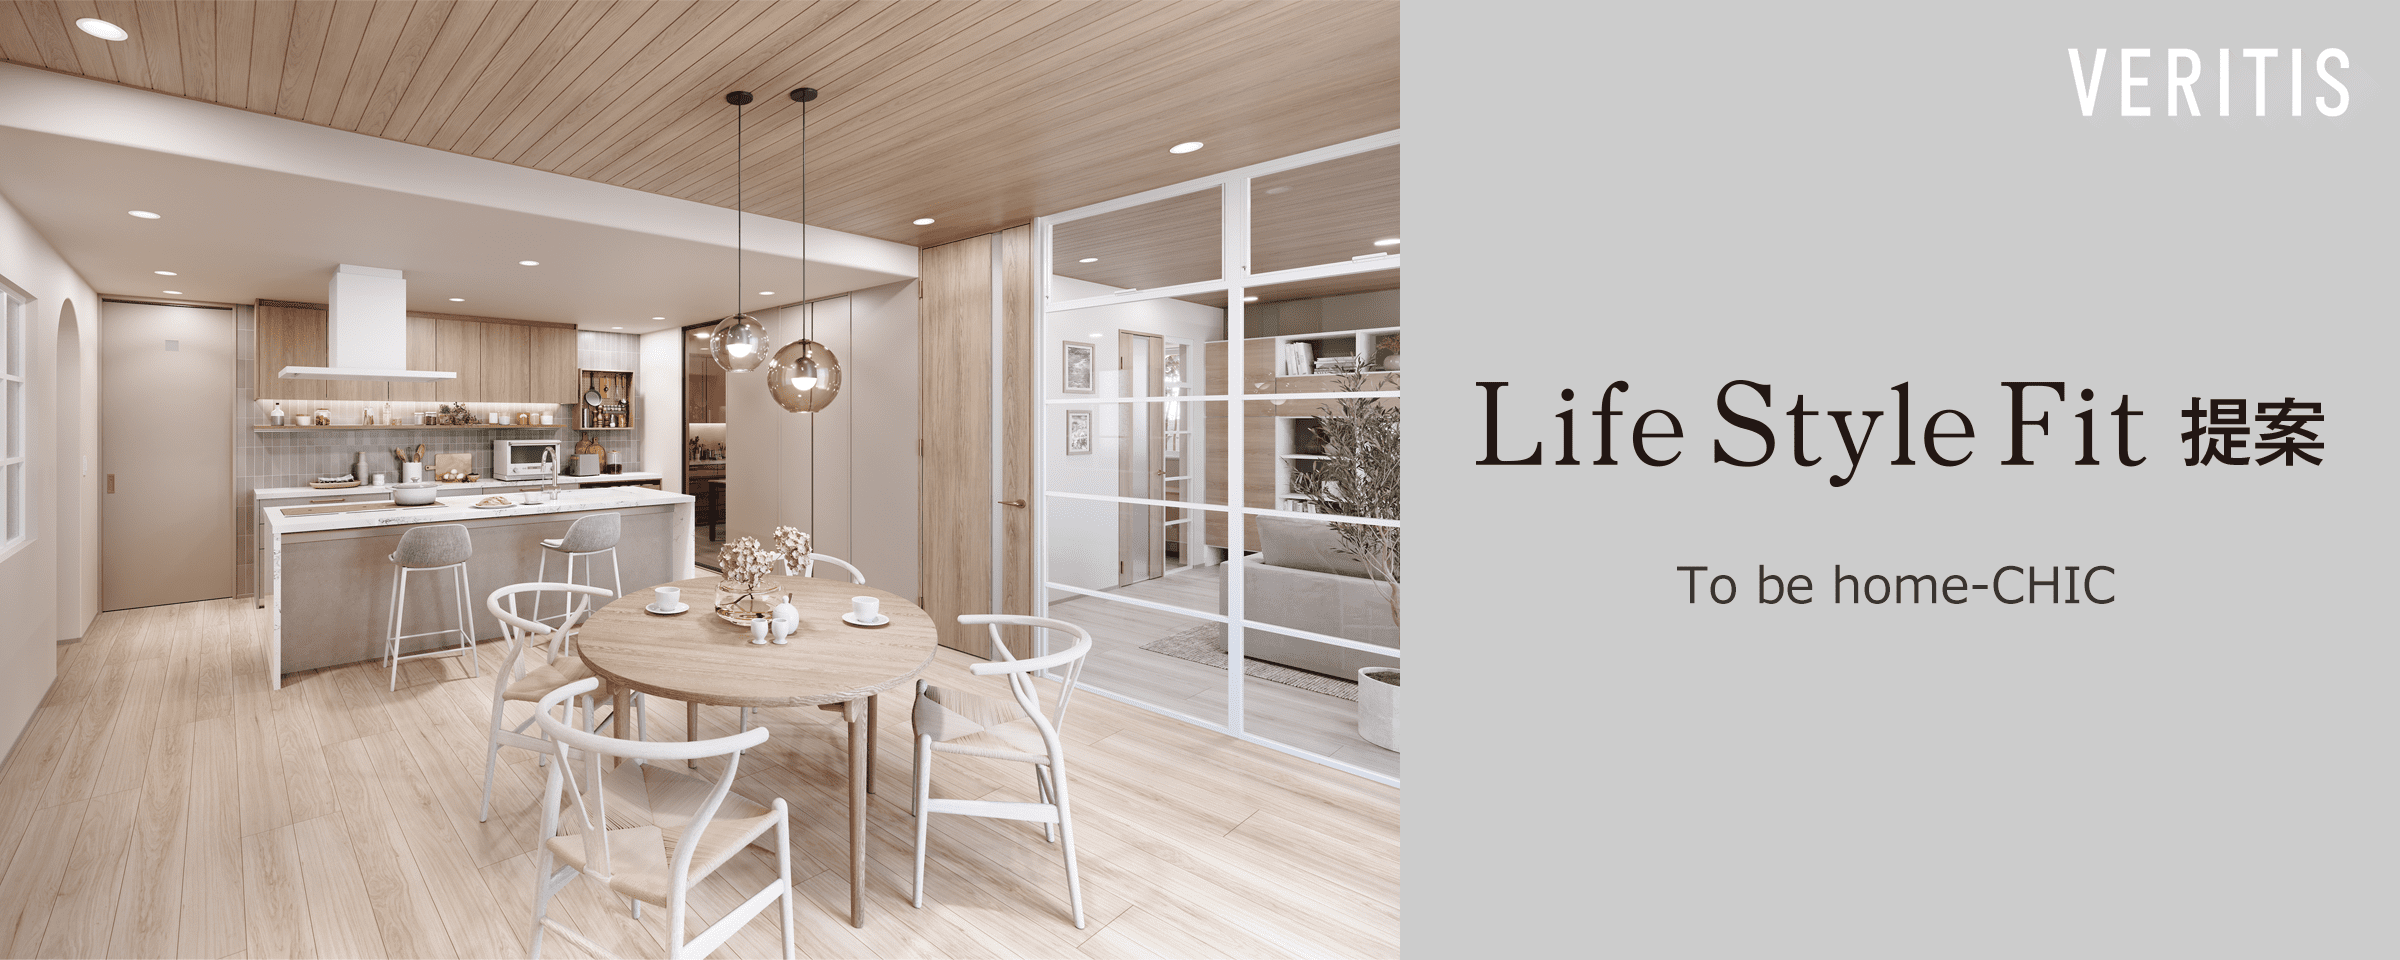 Life style Fit 提案 To be home-CHIC